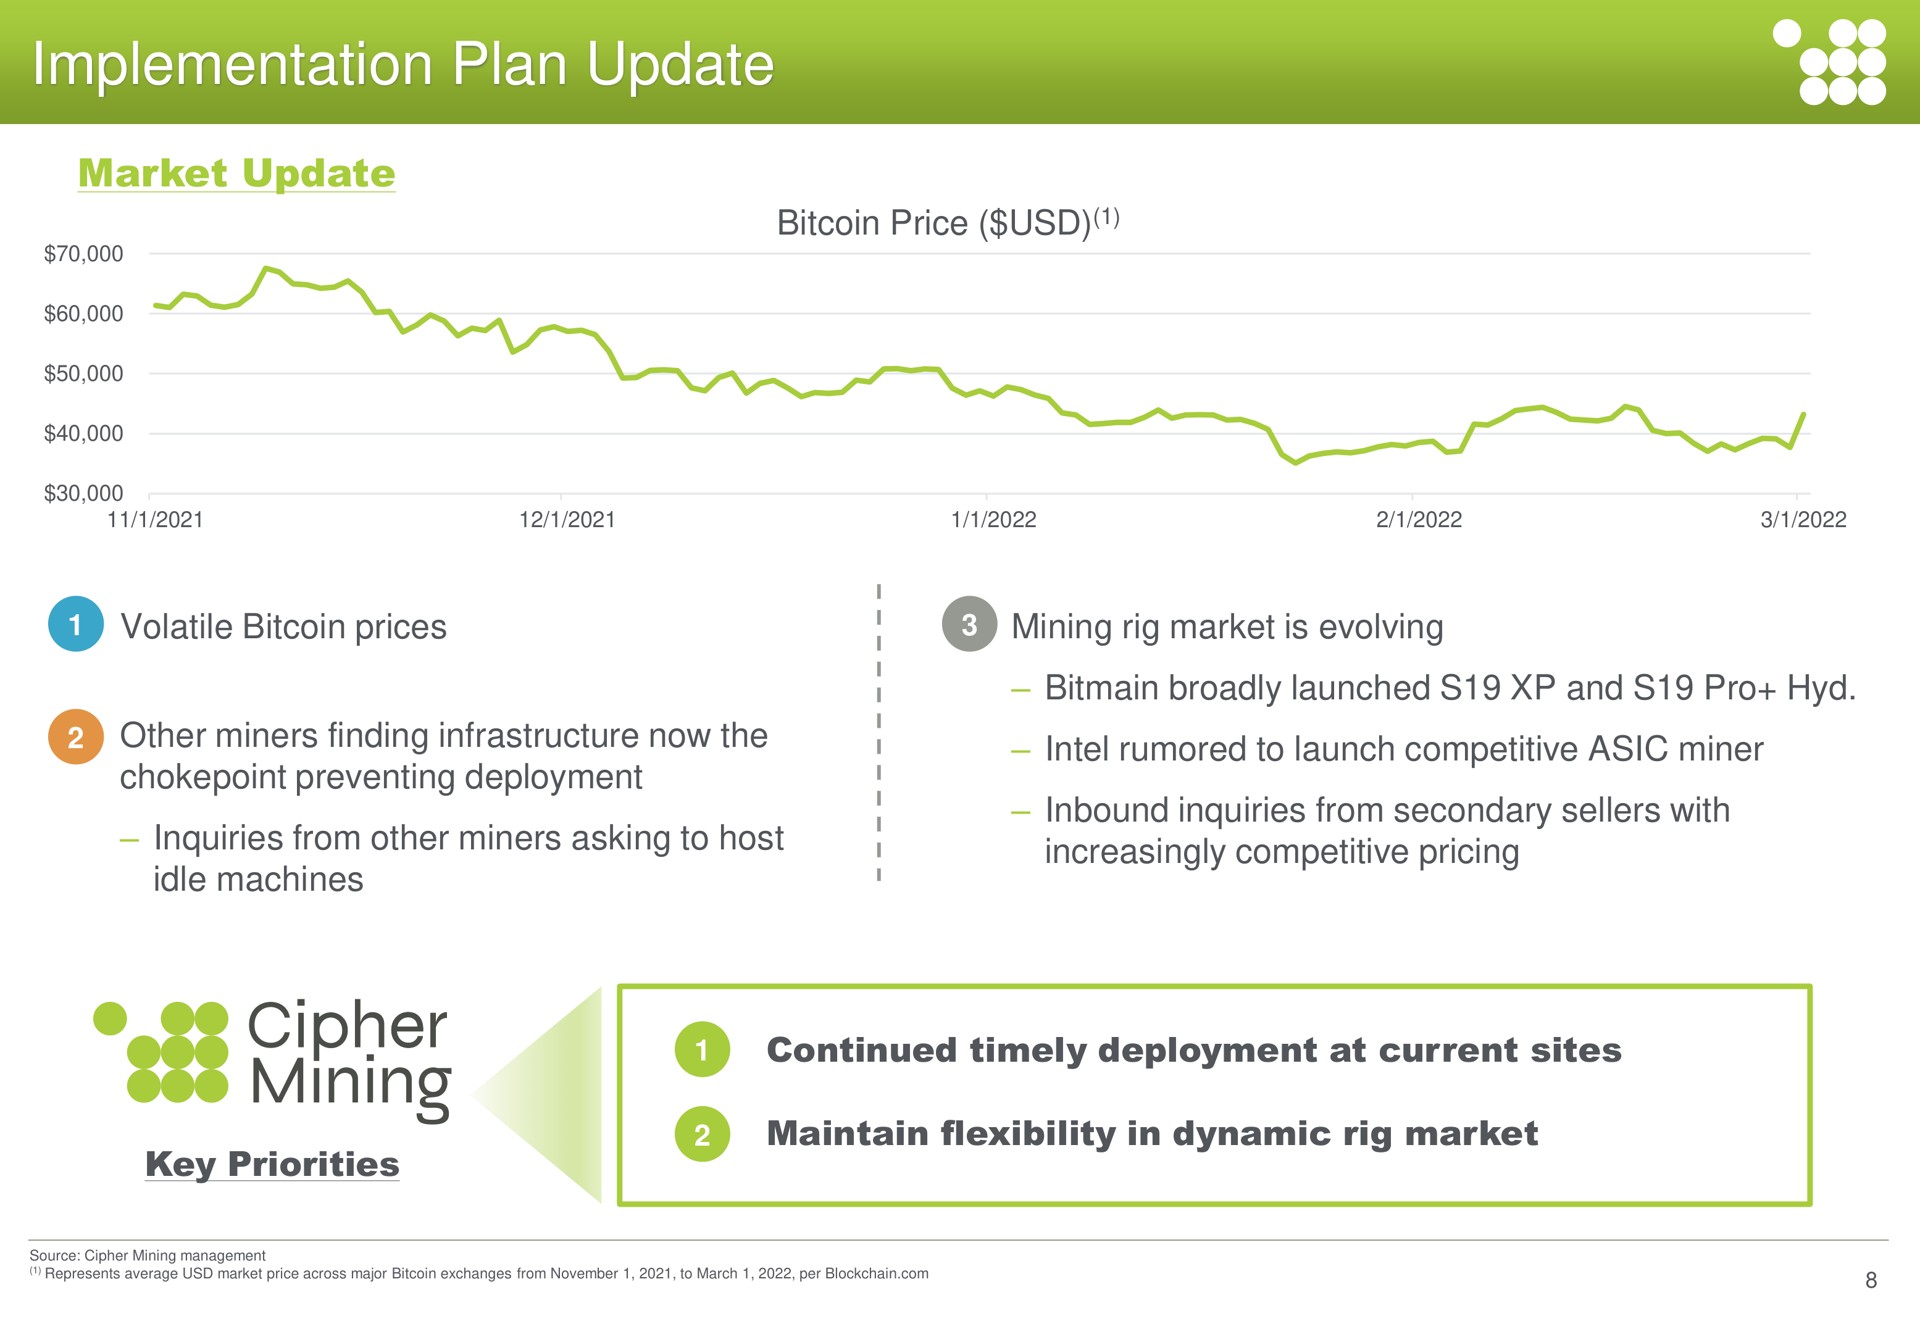 implementation plan update maintain flexibility in dynamic rig market | Cipher Mining